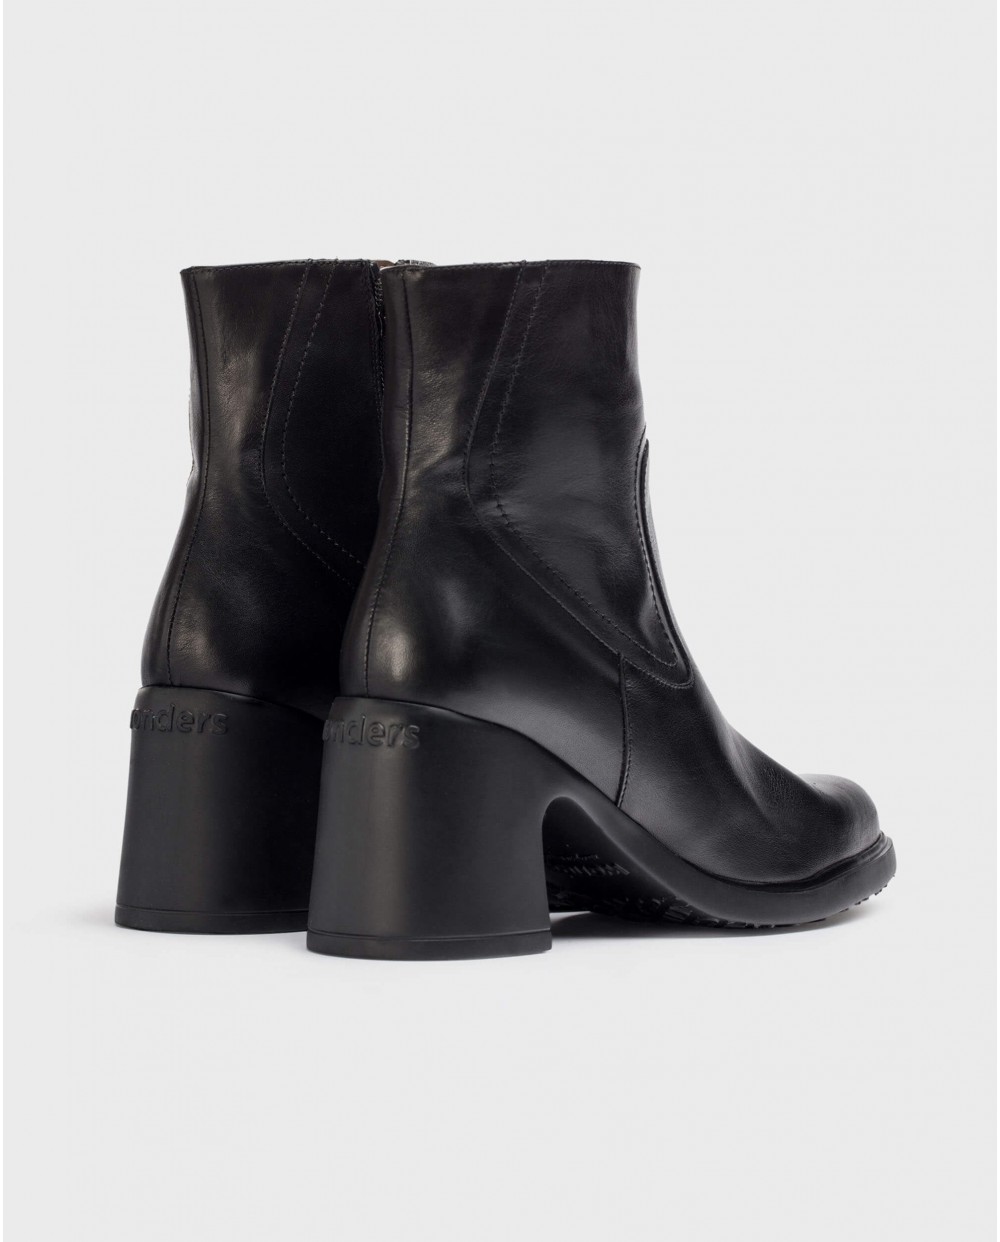 Wonders-Ankle Boots-Black MINI ankle boot